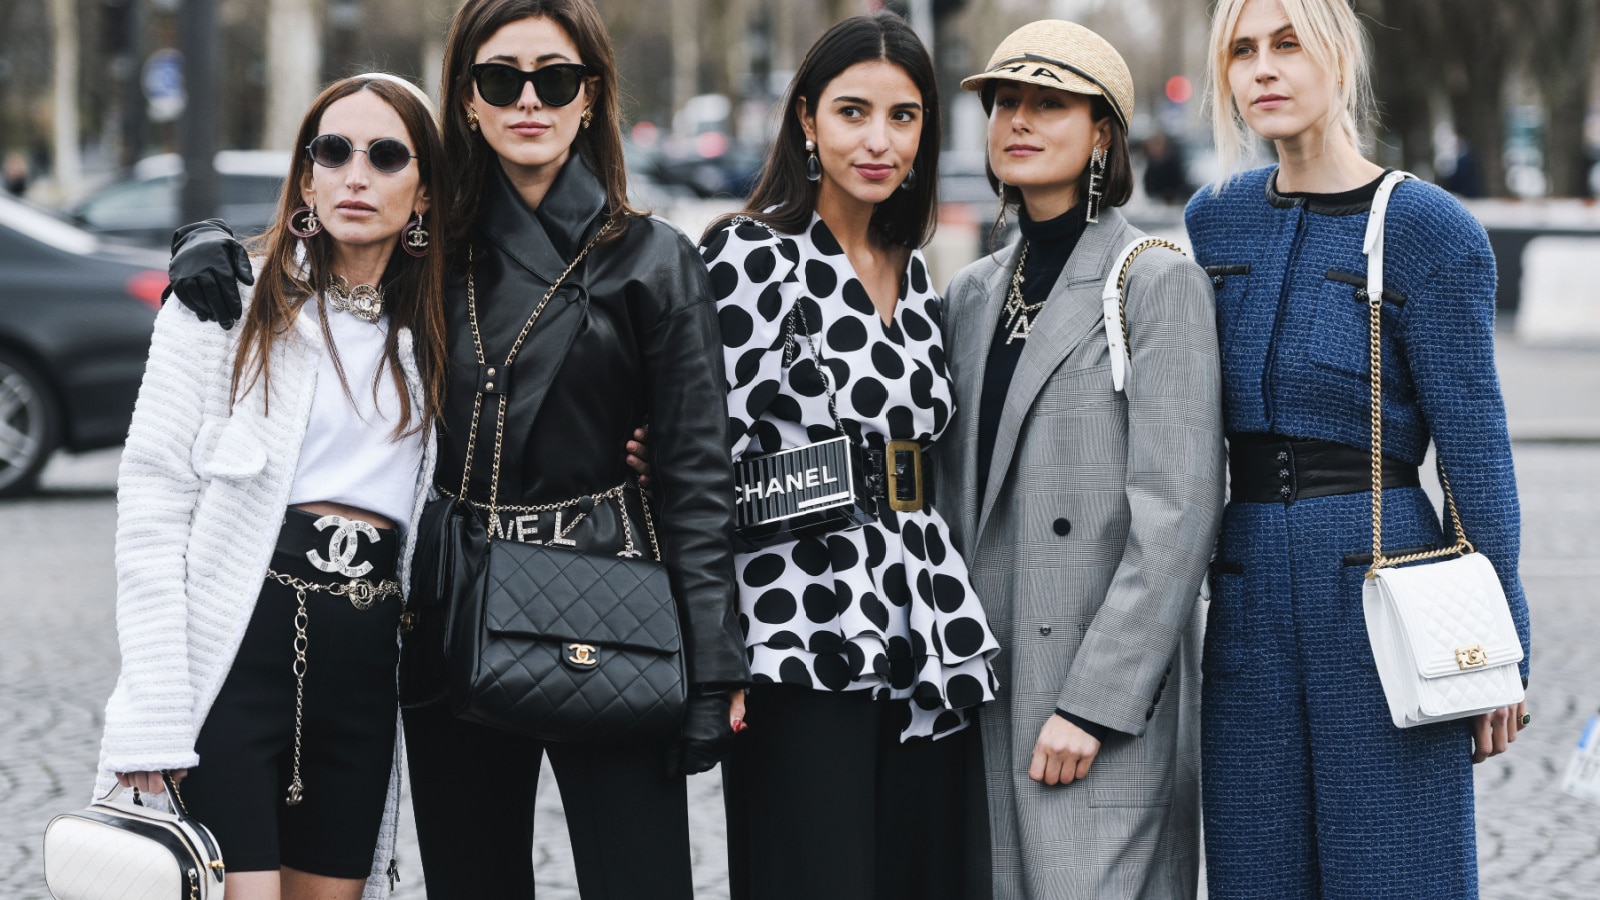 Paris, France - March 05, 2019: Street style outfit - Models, bloggers and influencers with fashionable and stylish looking after a fashion show during Paris Fashion Week - PFWFW19